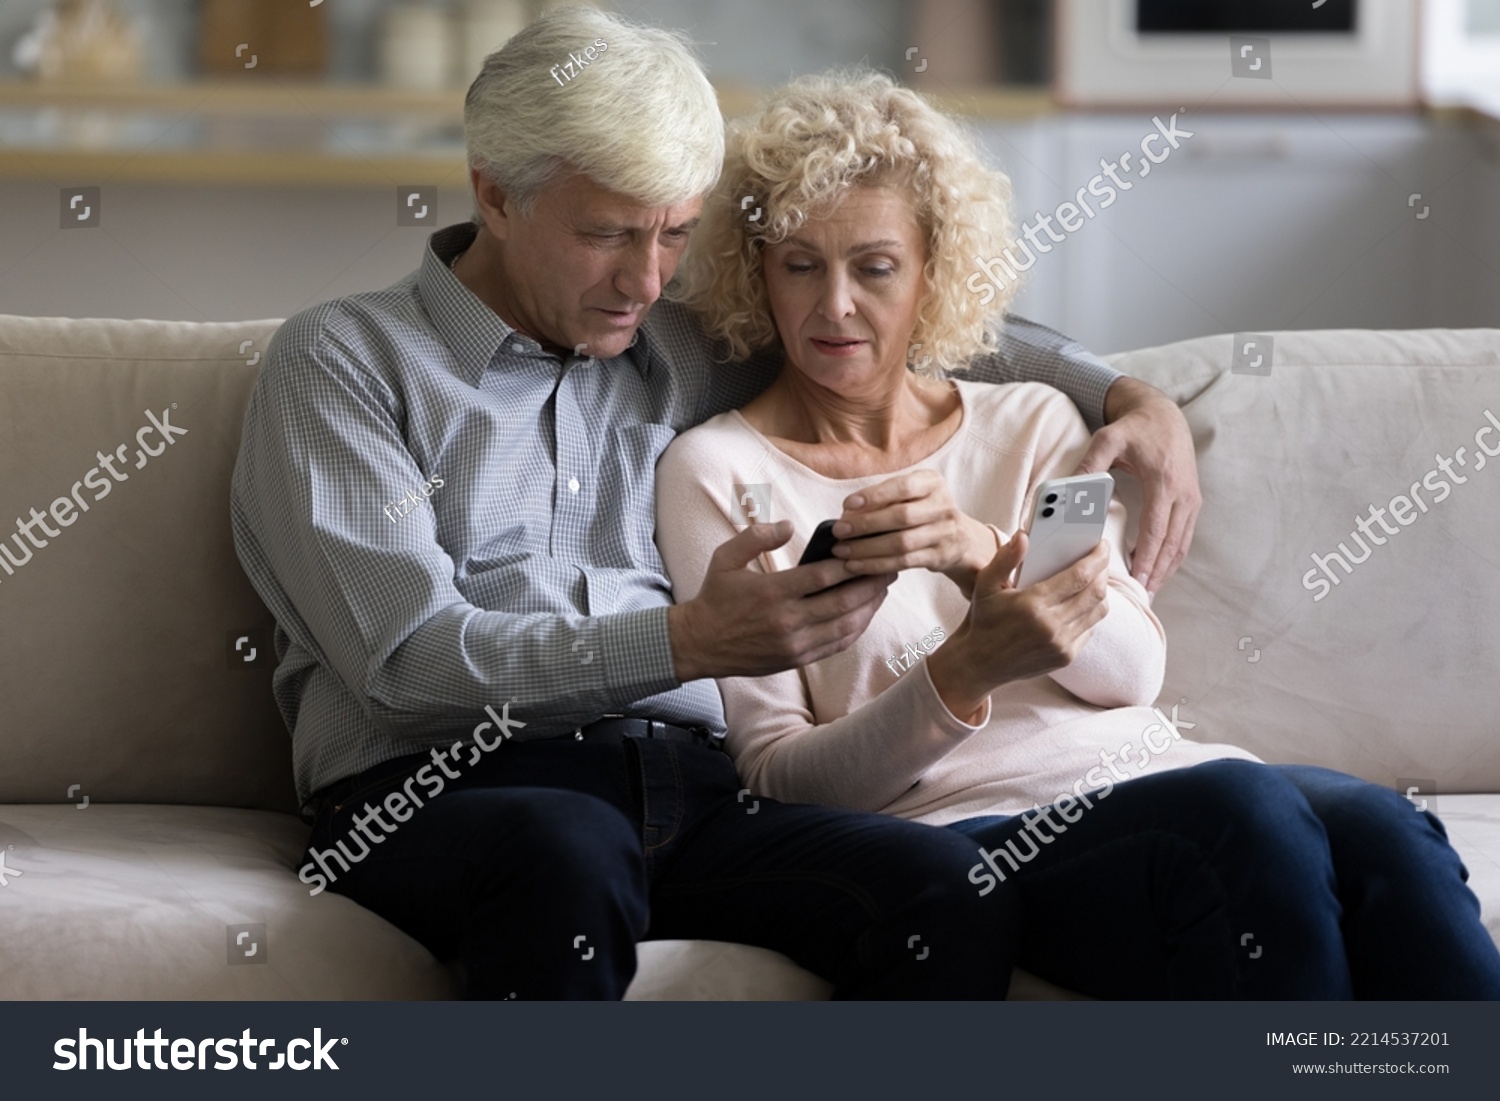 Serious elderly 70s couple sit on sofa hold two new bought modern smartphones, try to understand mobile application discussing software. Older generation use wireless gadgets, technology, lifestyle #2214537201